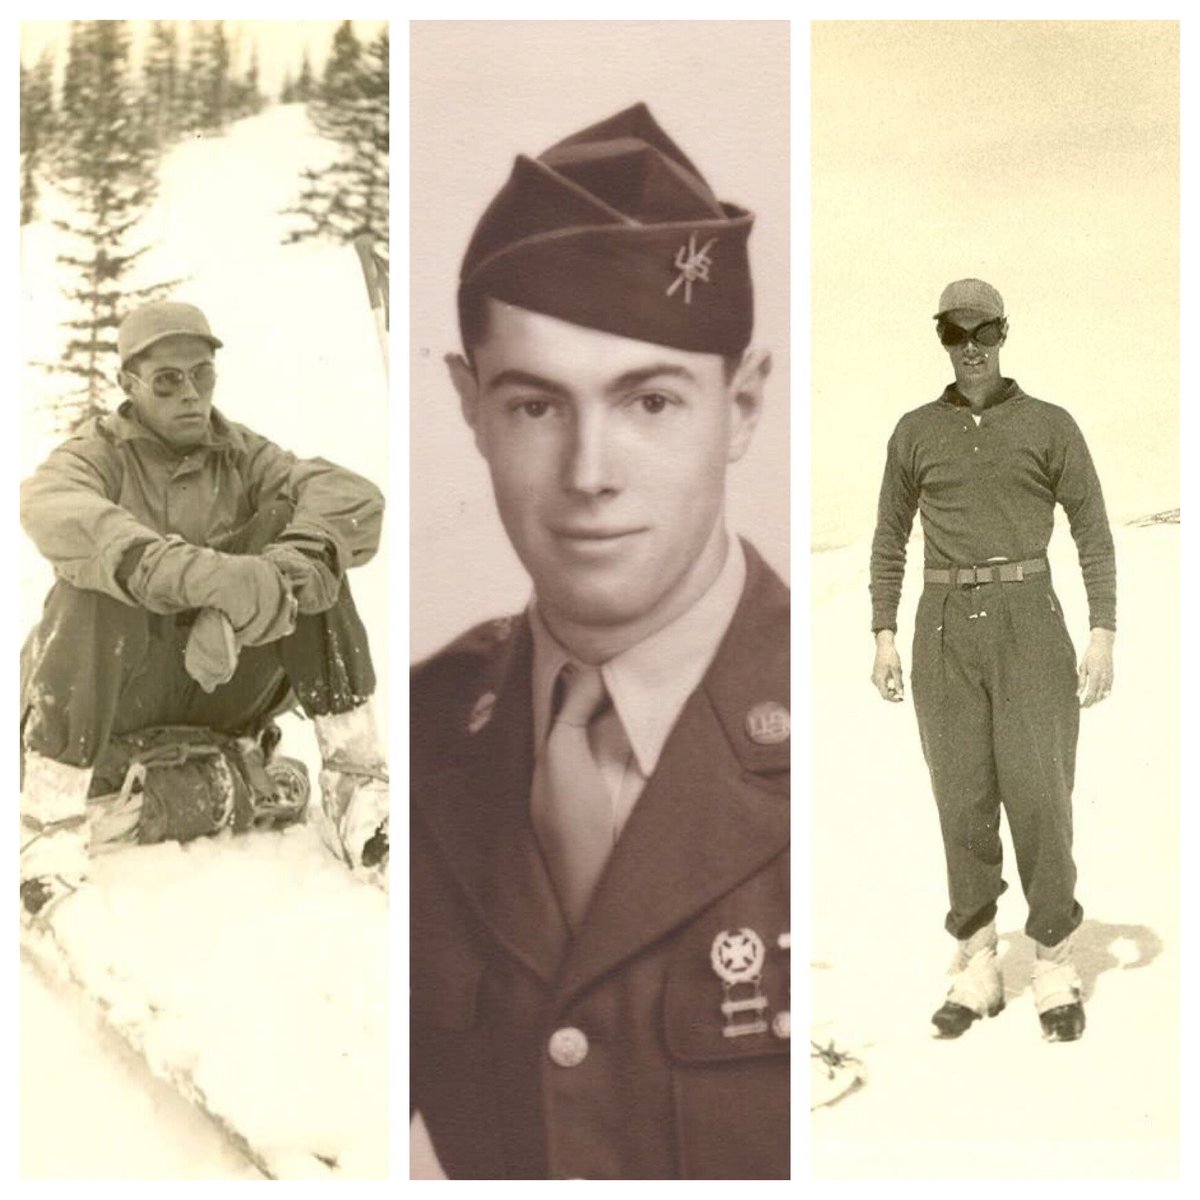 Continue celebrating the #4thofJuly by stopping by the #Museum July 5th at 3 pm for #10thMountainDivision #veteran Sandy Treat's Tales of the 10th talk. Pay tribute to the 10th by learning more about their Legacy and hearing first hand what life was like at #CampHale.